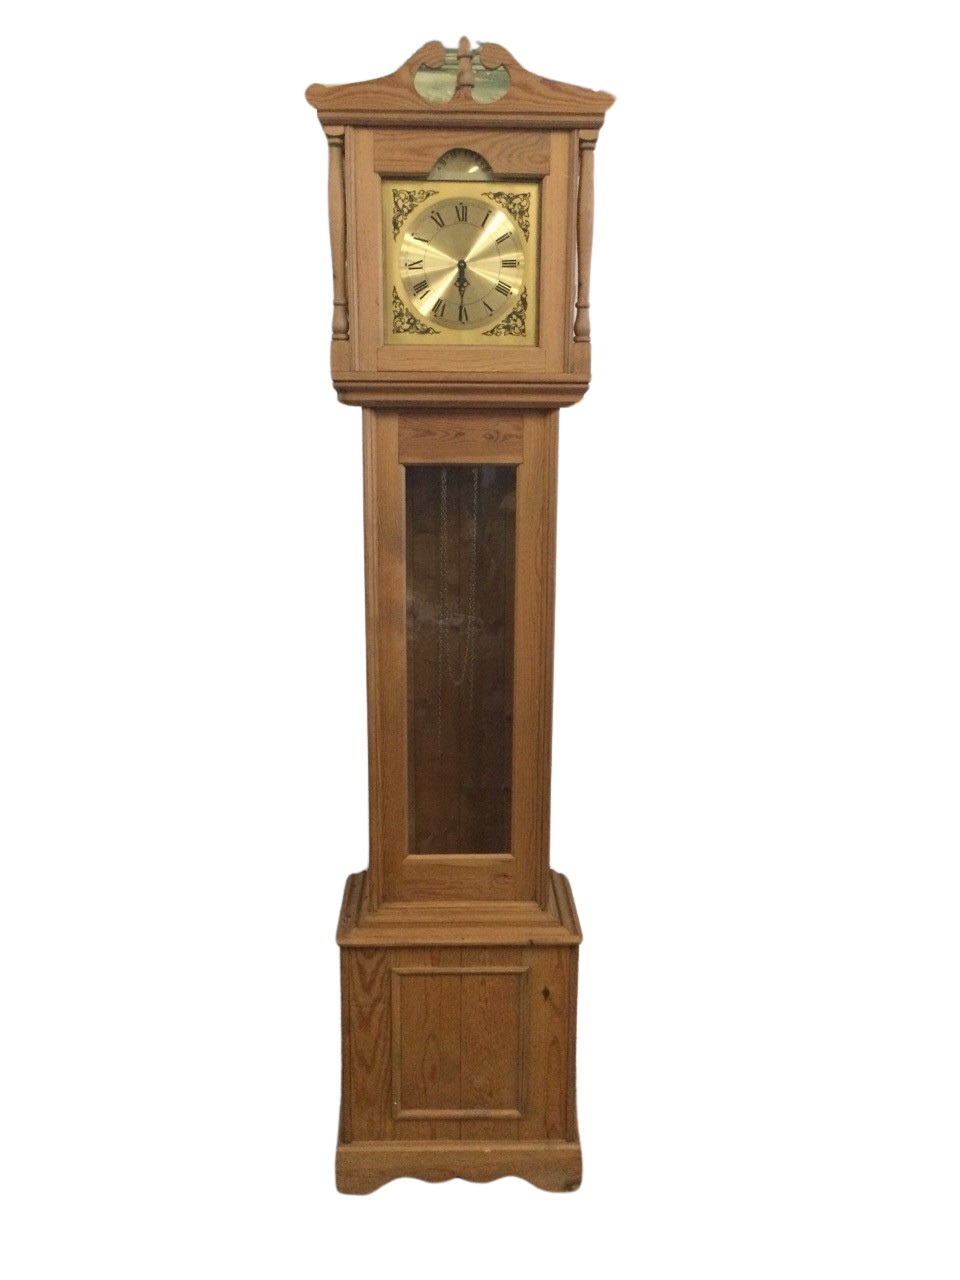 A Georgian style pine longcase clock with swan-neck pediment above glazed panel flanked by turned